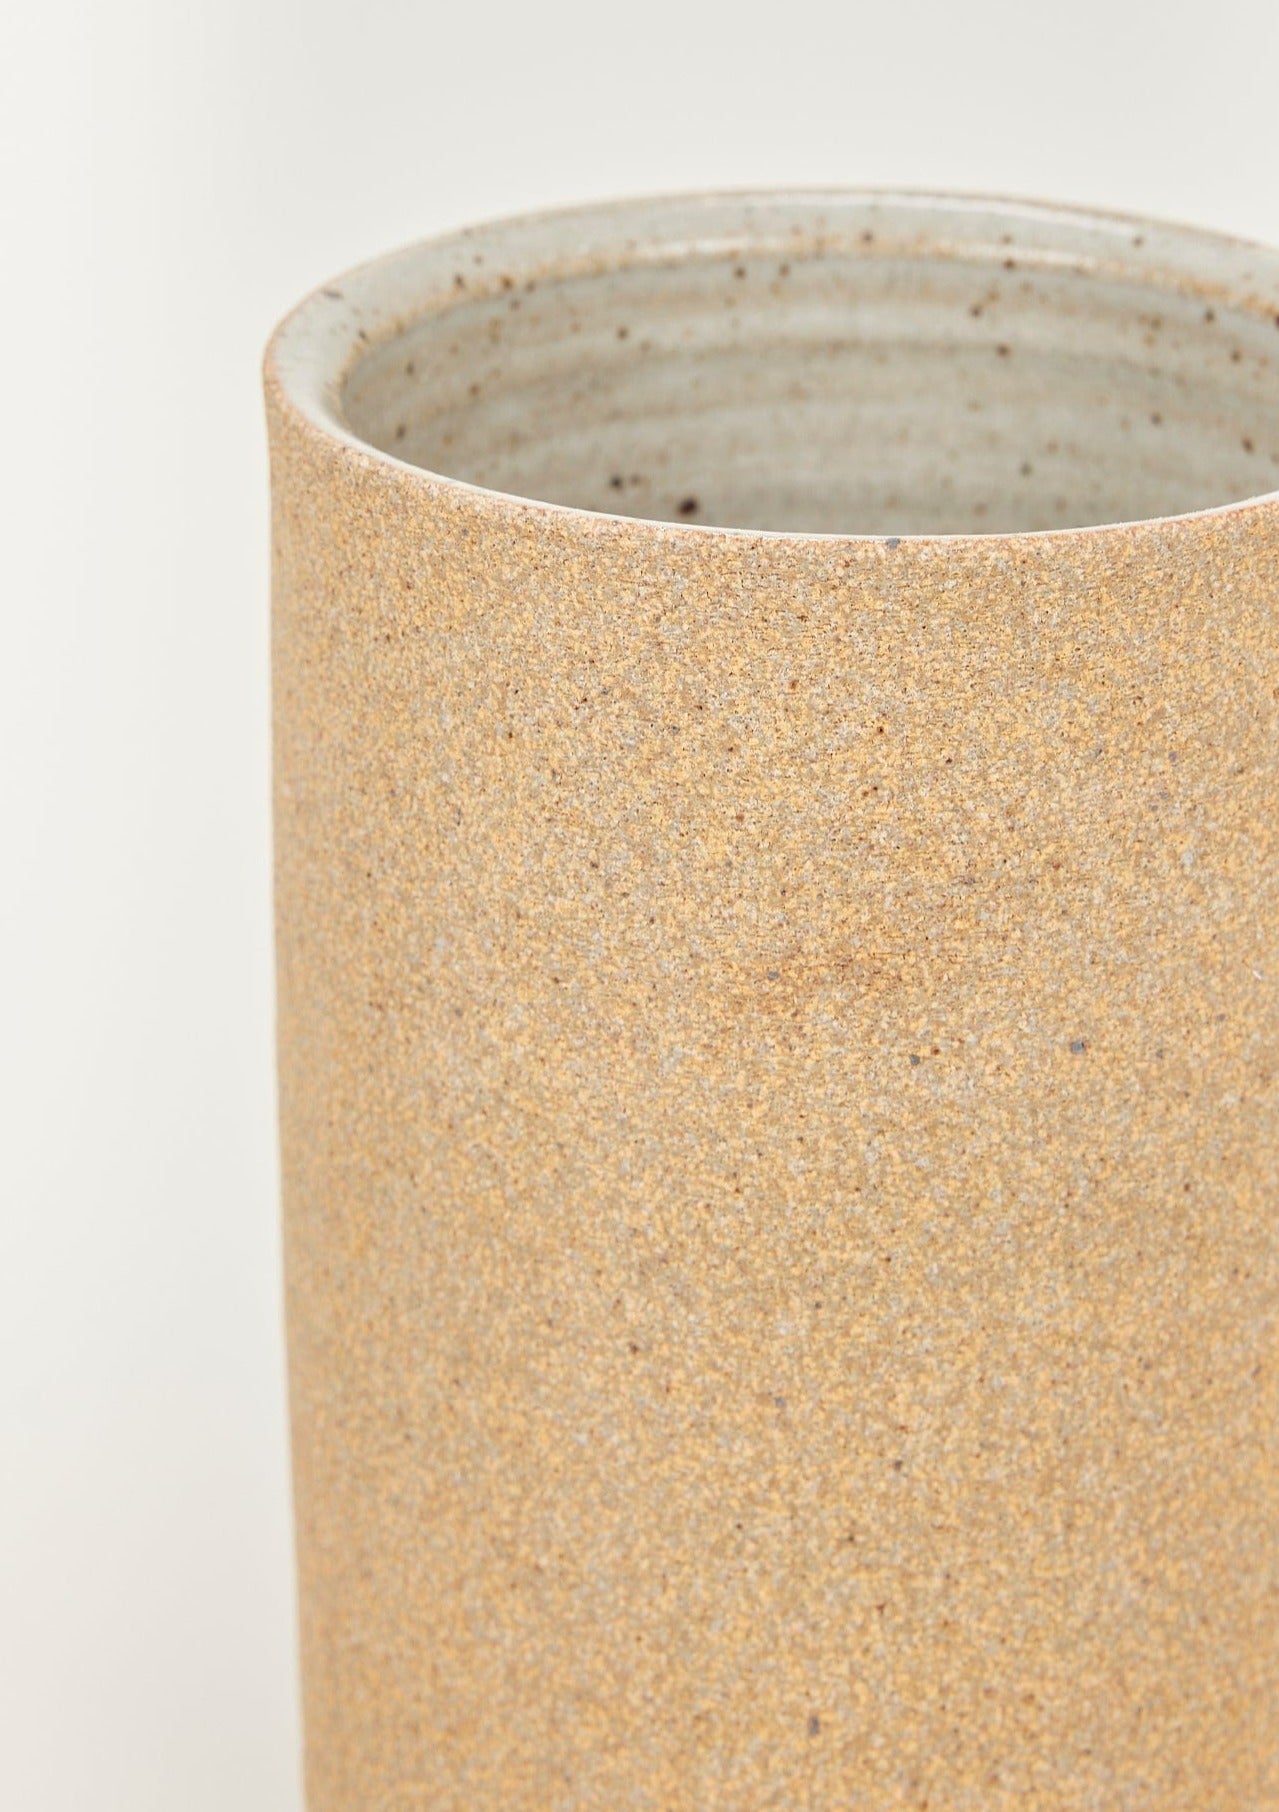 Handcrafted Sand Clay Cylinder Vase by Bob Dinetz at Afloral